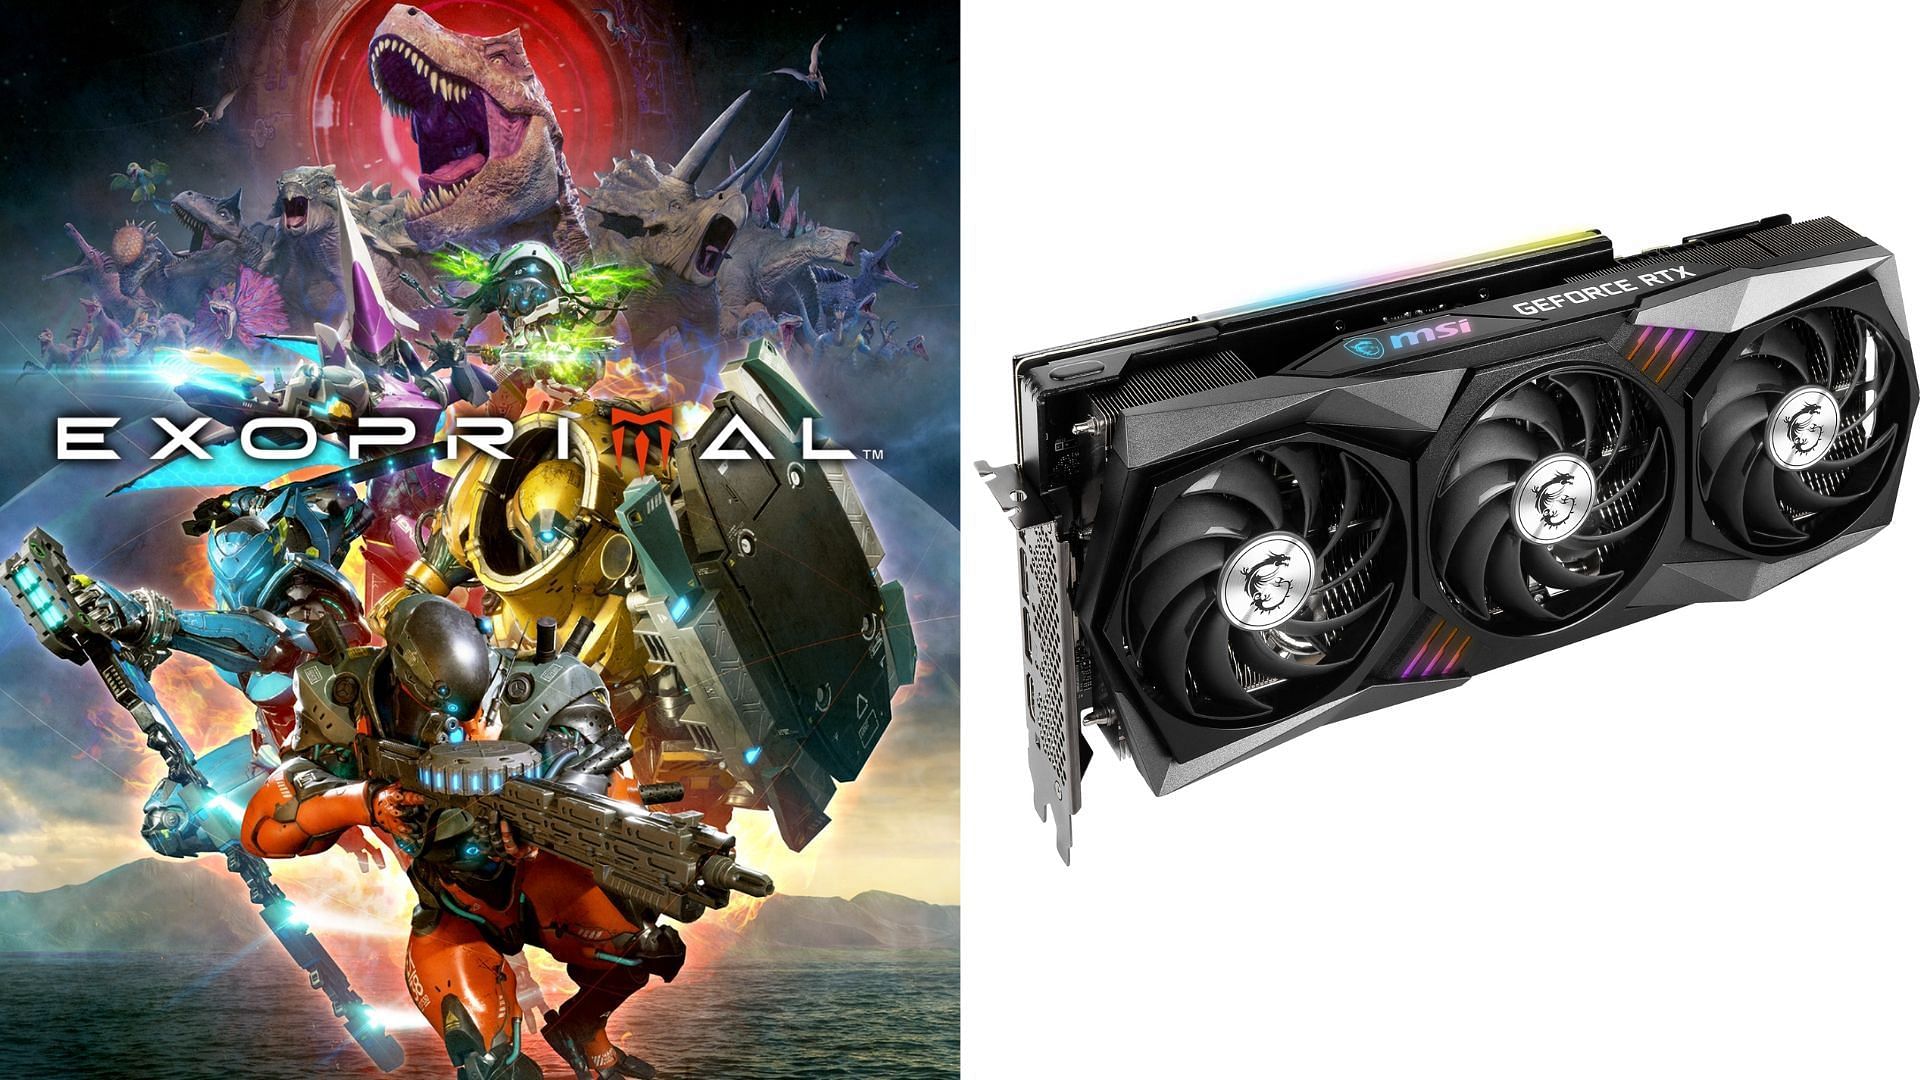 The RTX 3070 and RTX 3070 Ti are great GPUs for playing Exoprimal (Image via MSI and Capcom)